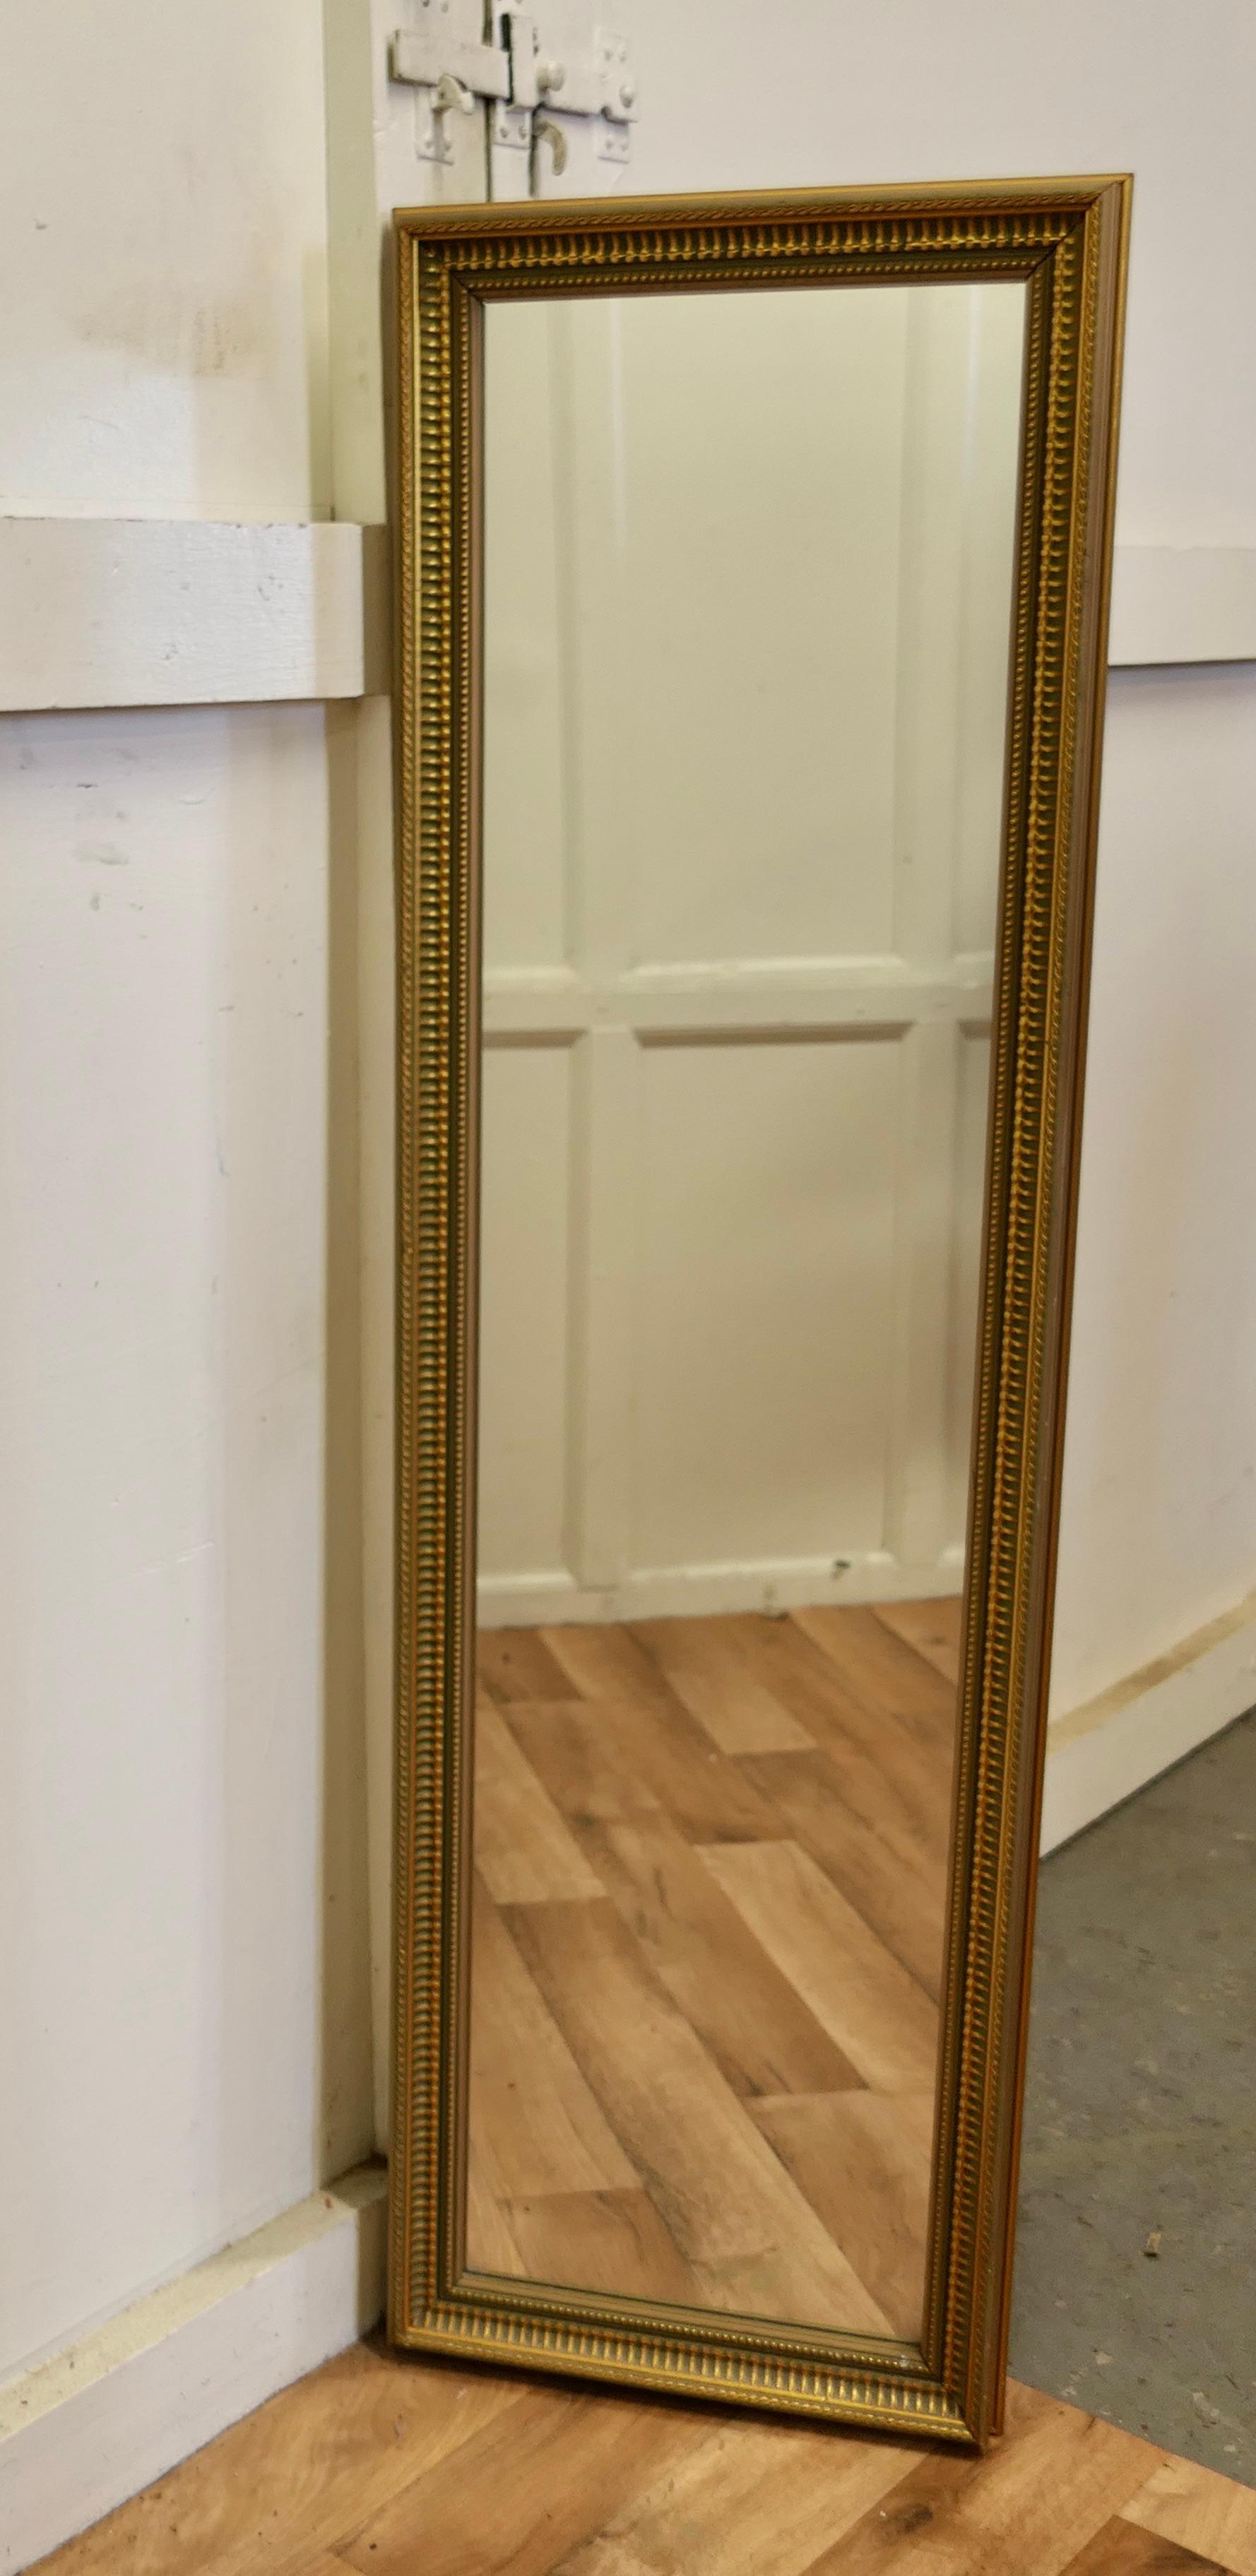 A Decorative Long Gilt/Green Dressing Mirror

A delightful piece, the mirror has a 2” wide Gilt frame in gold over a green background, the glass is in good and in unblemished condition. 
A good decorative piece
The frame is 52” high and 16”